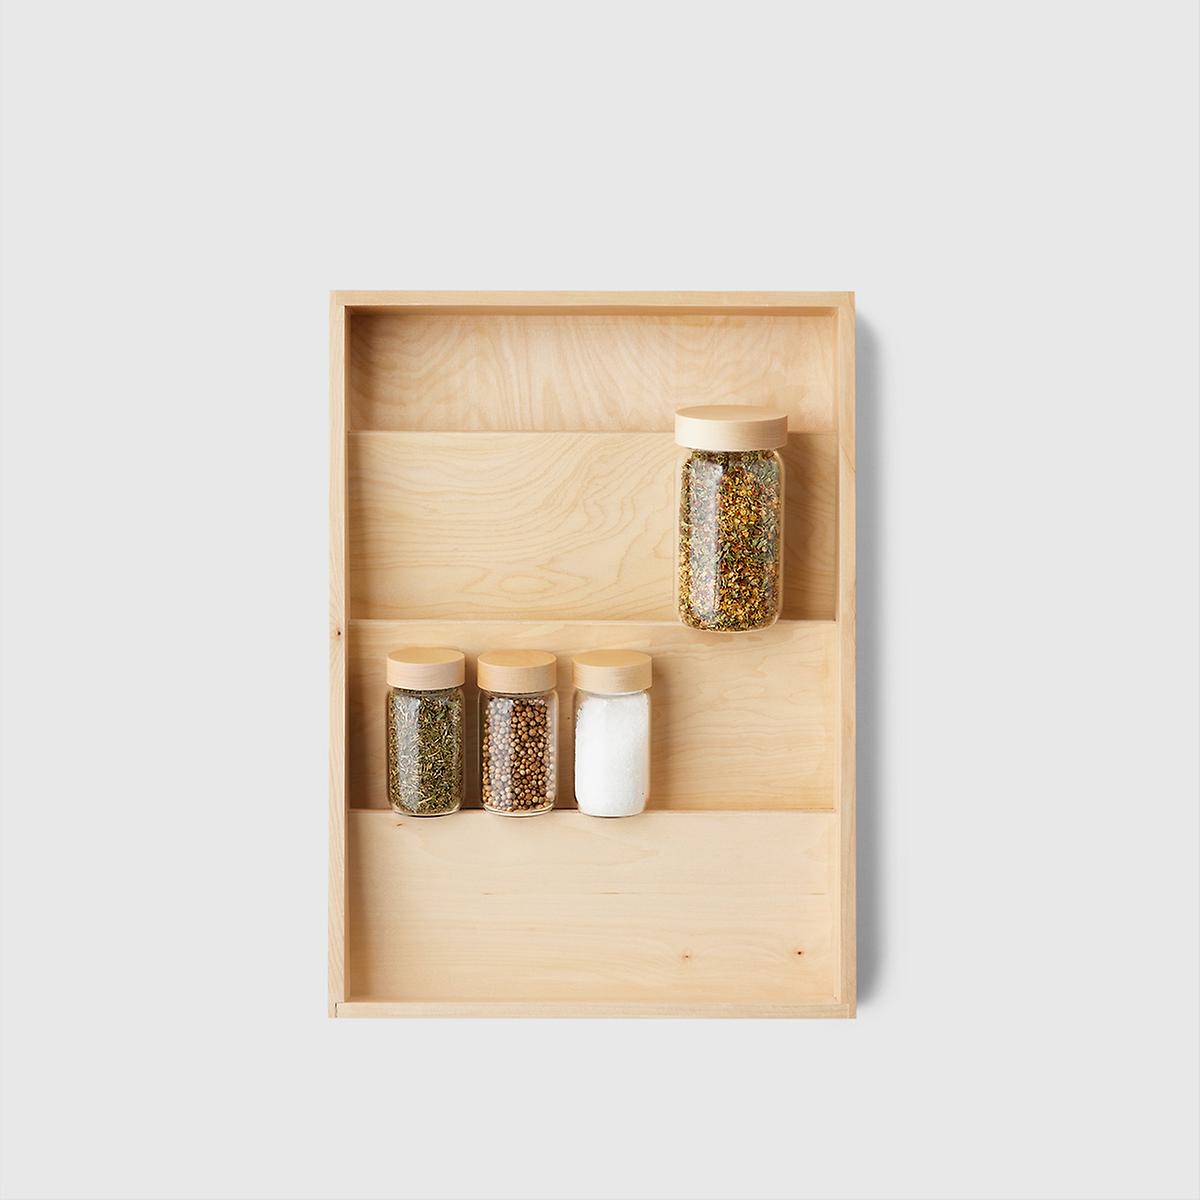 https://www.containerstore.com/catalogimages/473221/10086577_Kon_Mari_narrow_in-drawer_s.jpg